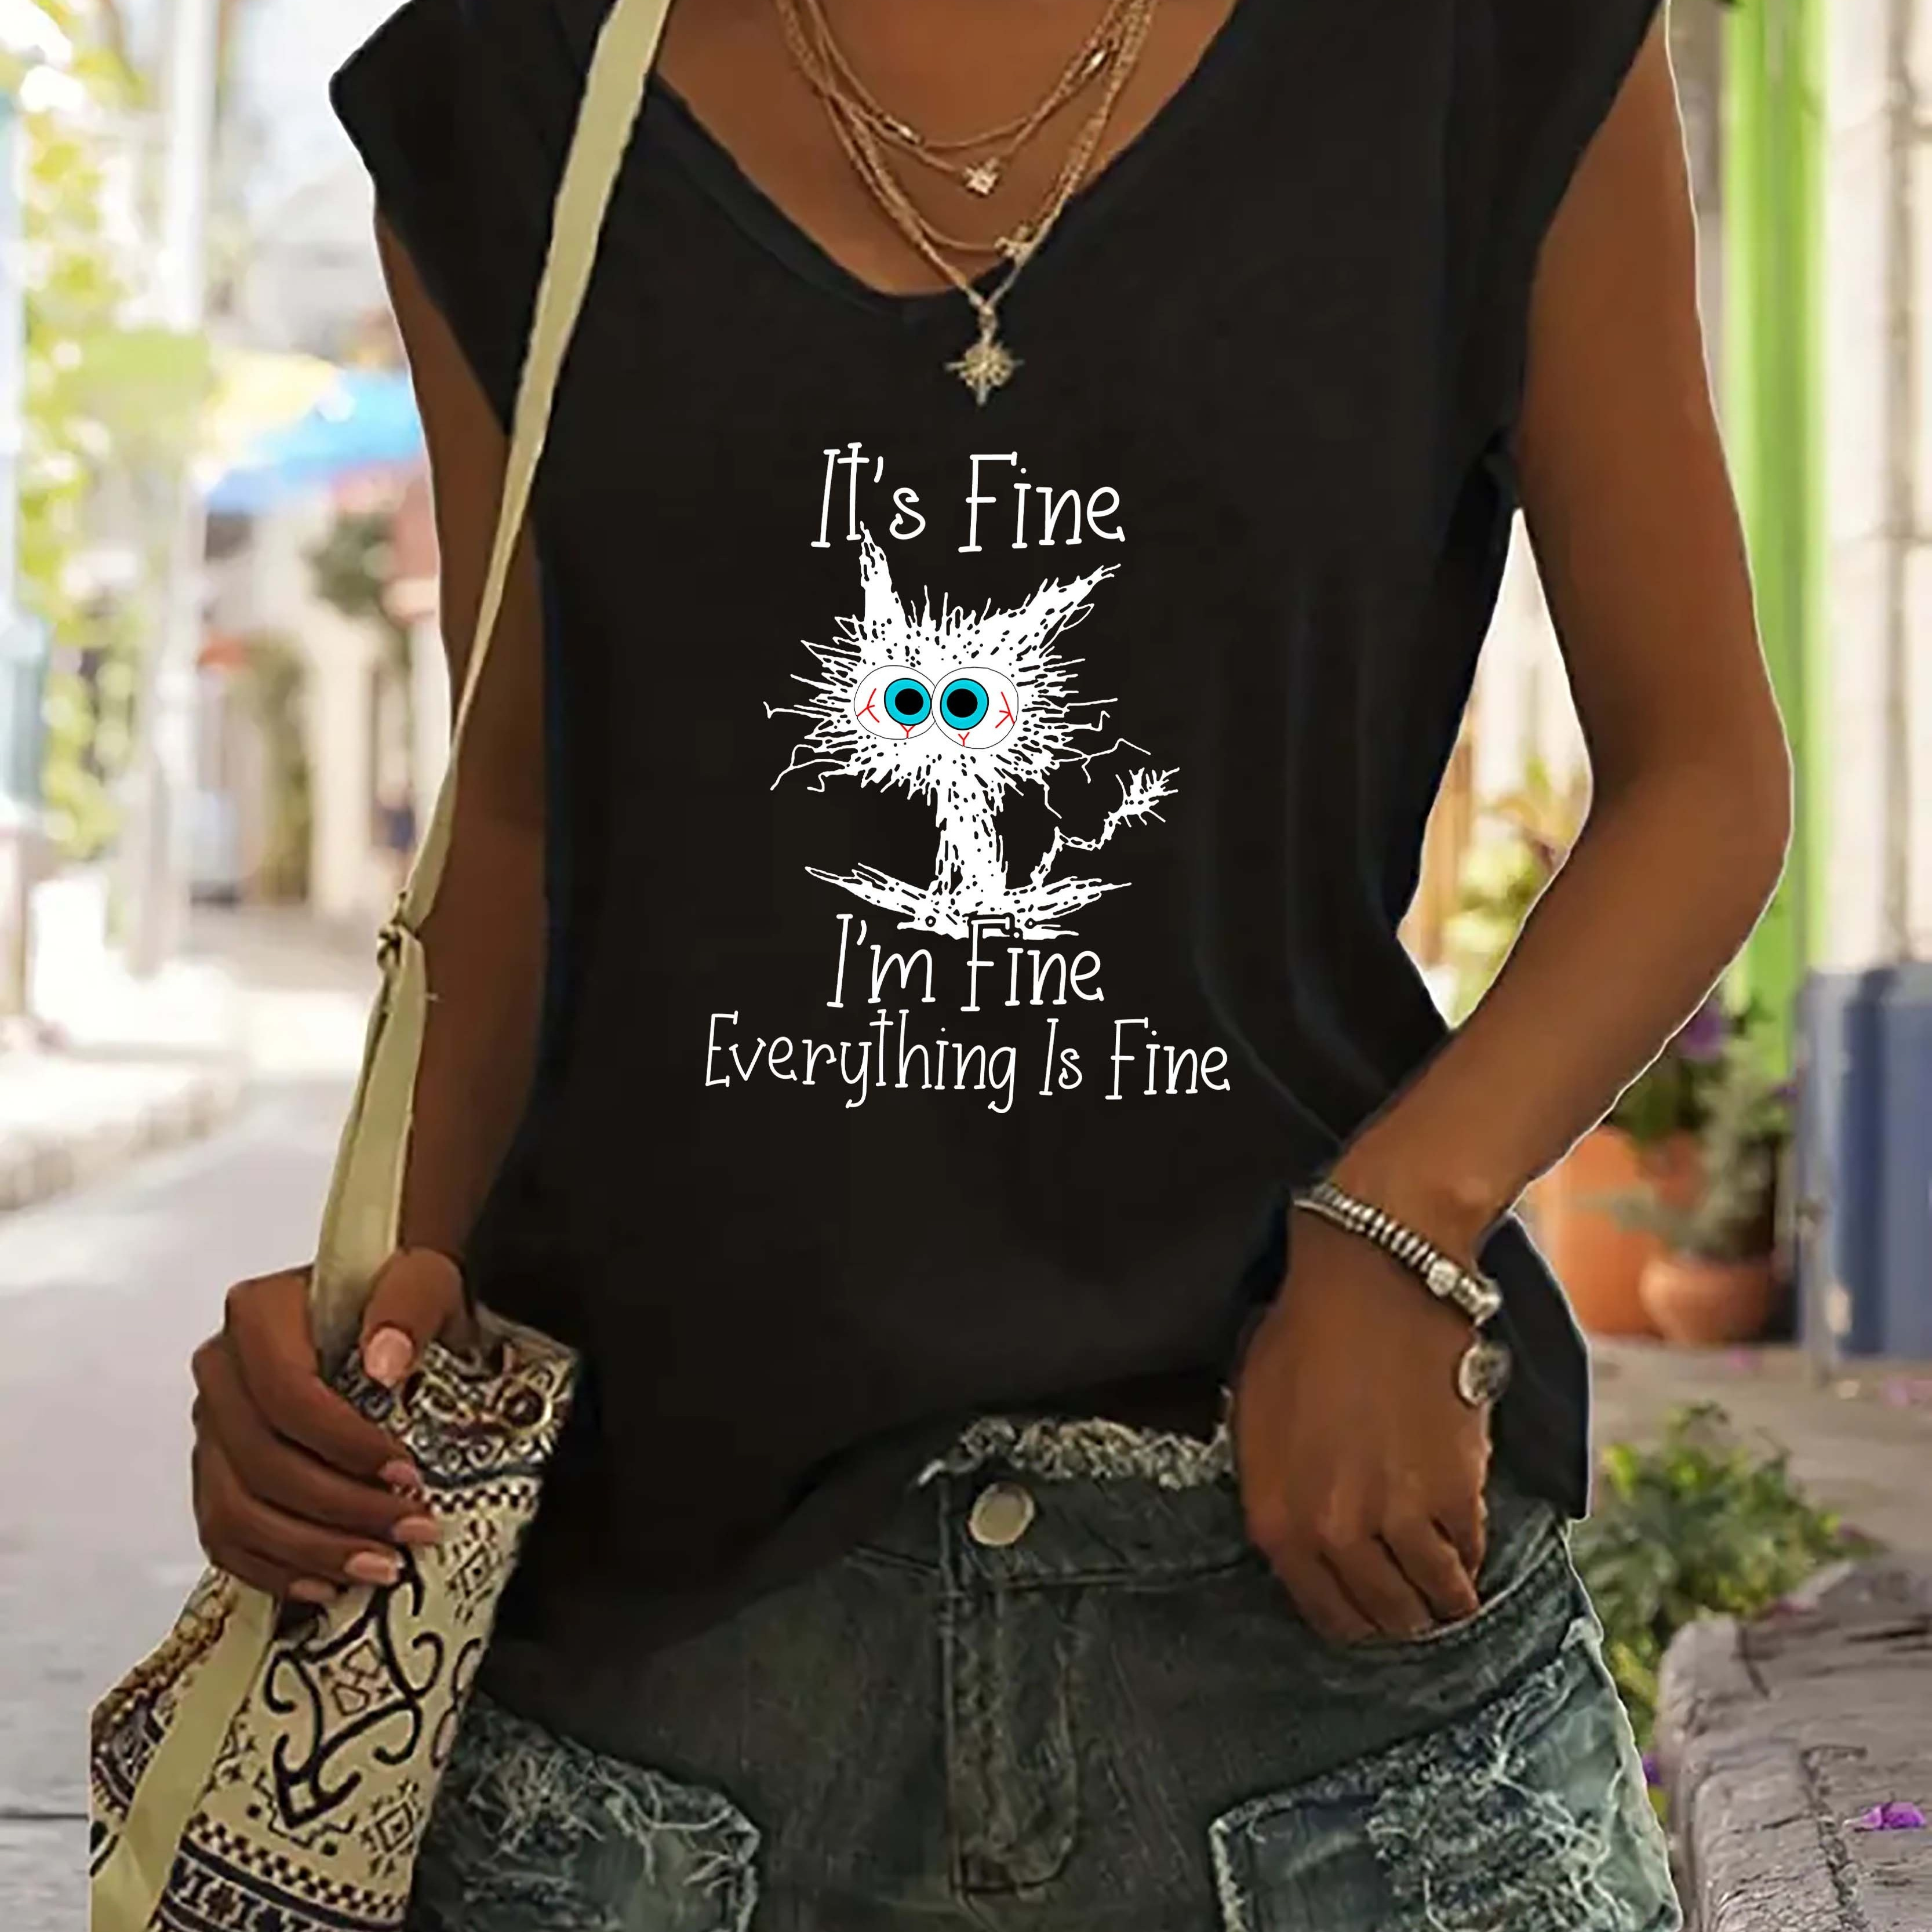 

it's Fine. I Am Fine. Everthing Is Fine" Letter Print T-shirts, Crew Neck Short Sleeve Cat Graphic Tee, Women's Summer Tops